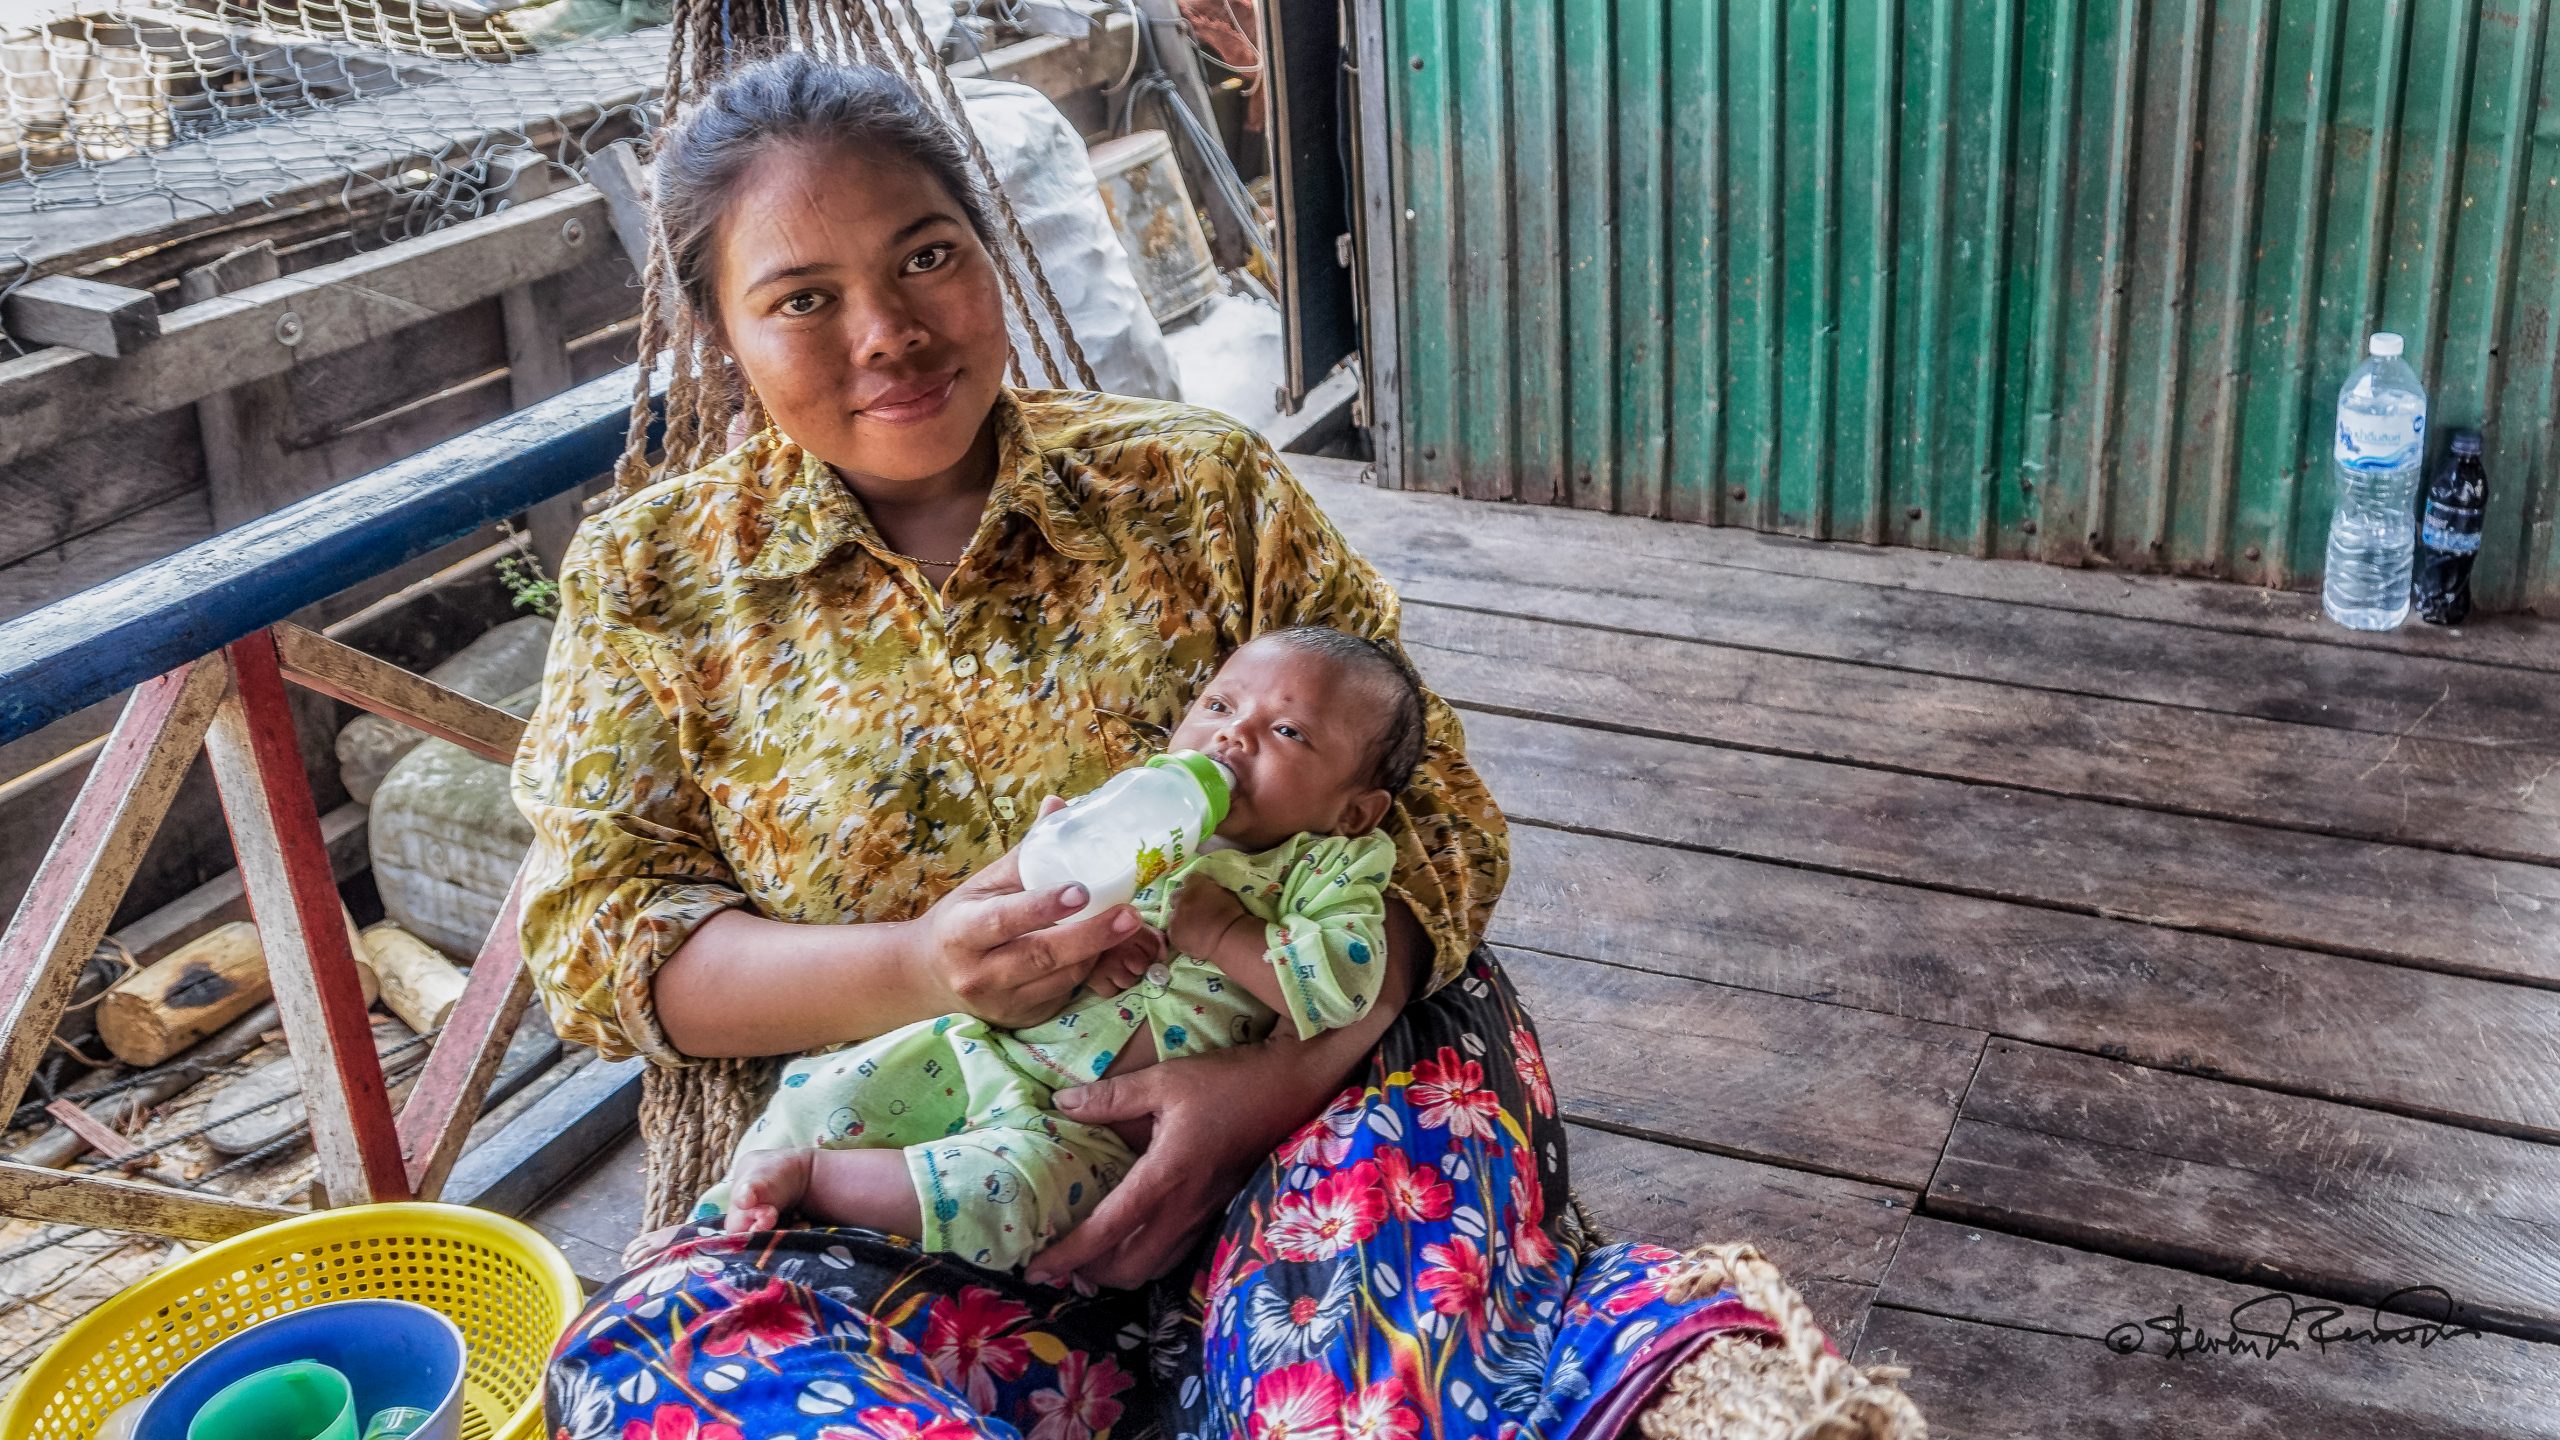 Cambodian woman bottle feeds a baby while sitting in a wooden structure near a boat - she's looking at the camera and smiling